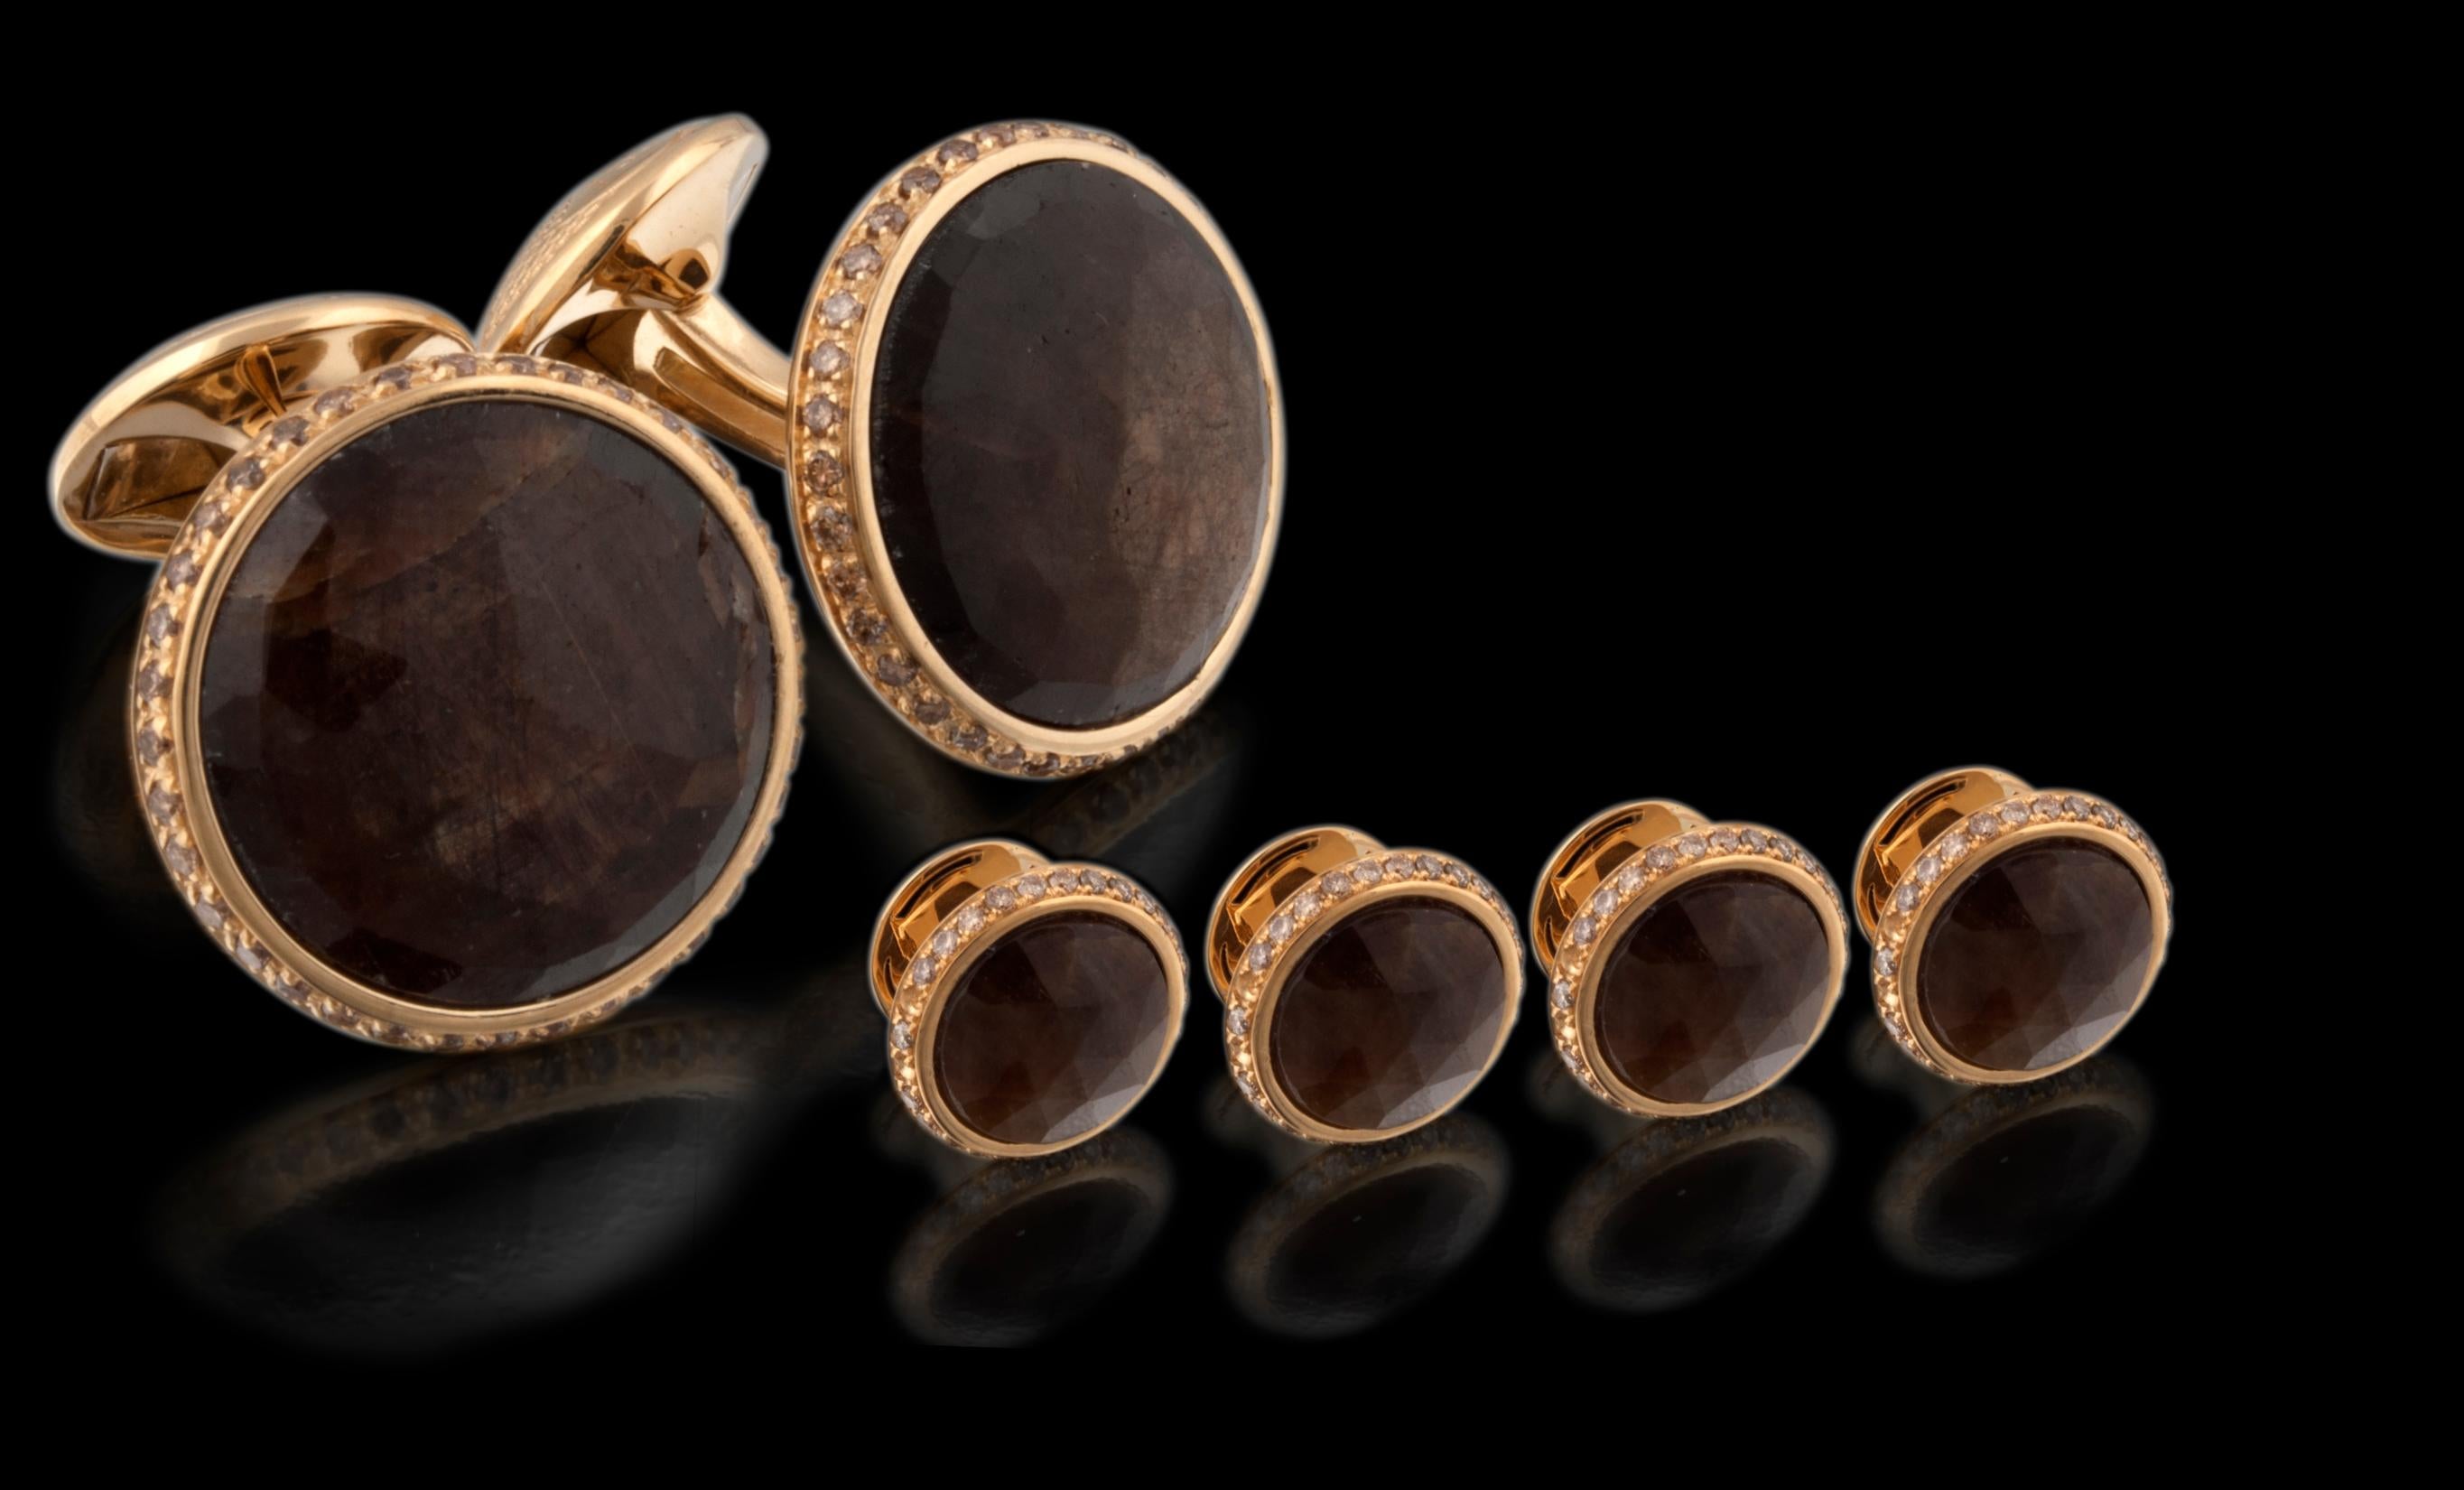 Faceted cabochons of semi-precious and precious stones have been immaculately set within a perfect bezel setting, decorated with exquisite diamonds, scattered, framing the stone. A classic collection of cufflinks that will remain timeless, to pass